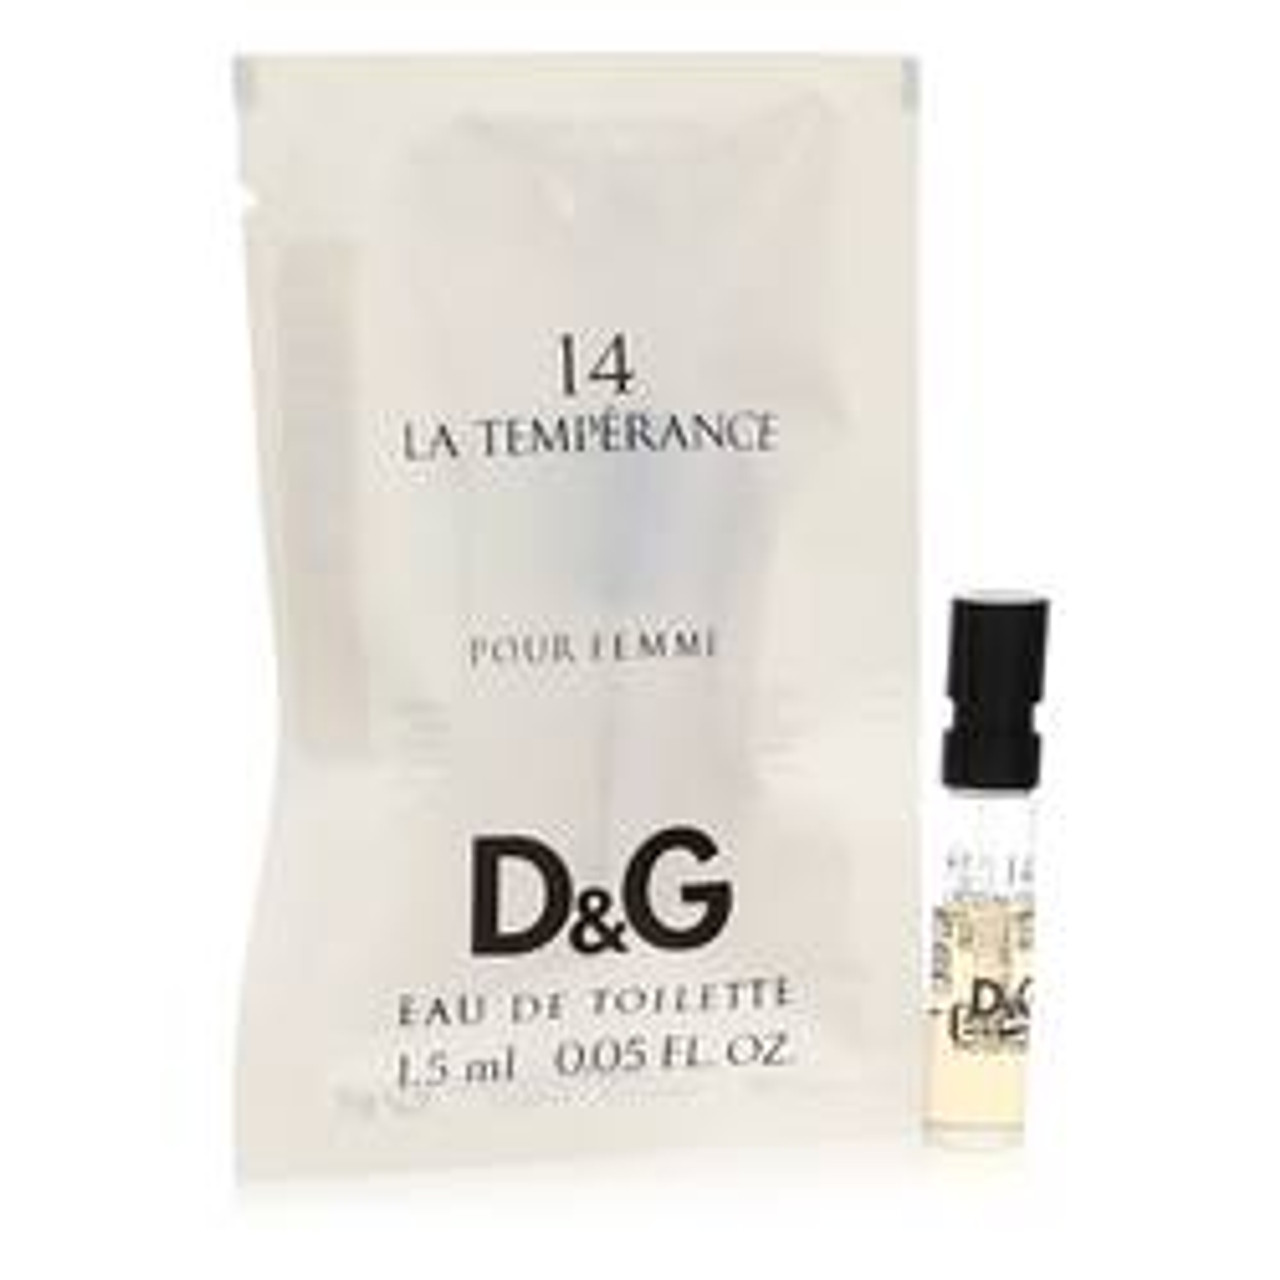 La Temperance 14 Perfume By Dolce & Gabbana Vial (Sample) 0.05 oz for Women - [From 7.00 - Choose pk Qty ] - *Ships from Miami